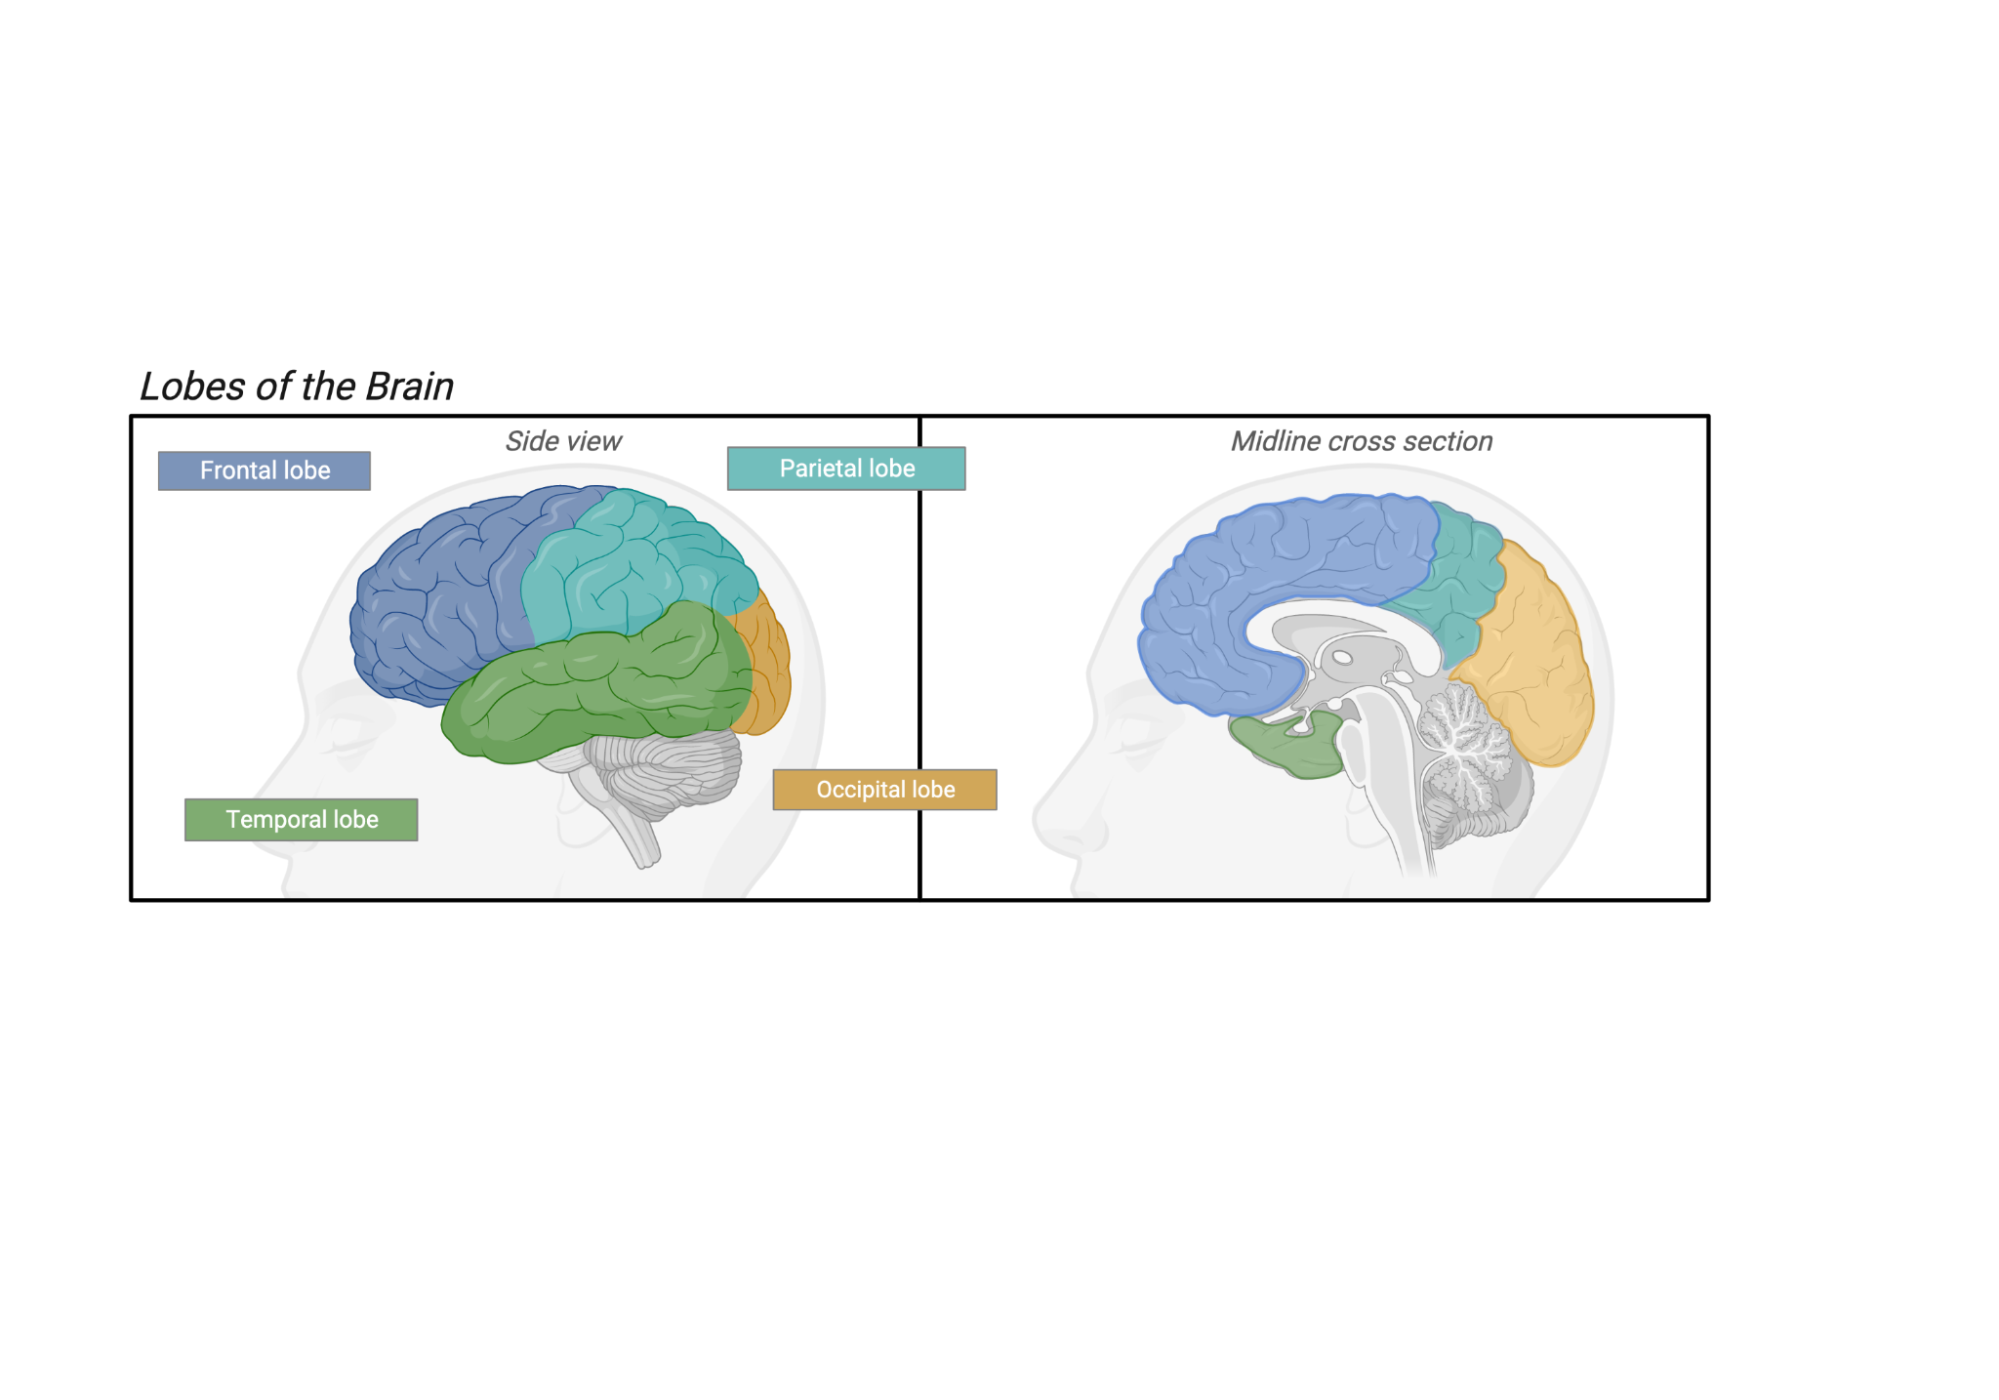 The left half of the image shows a side or lateral view of the human brain, with the frontal, parietal, temporal and occipital lobes labeled. The right half shows a cross section through the midline, revealing another way to see these same 4 lobes.